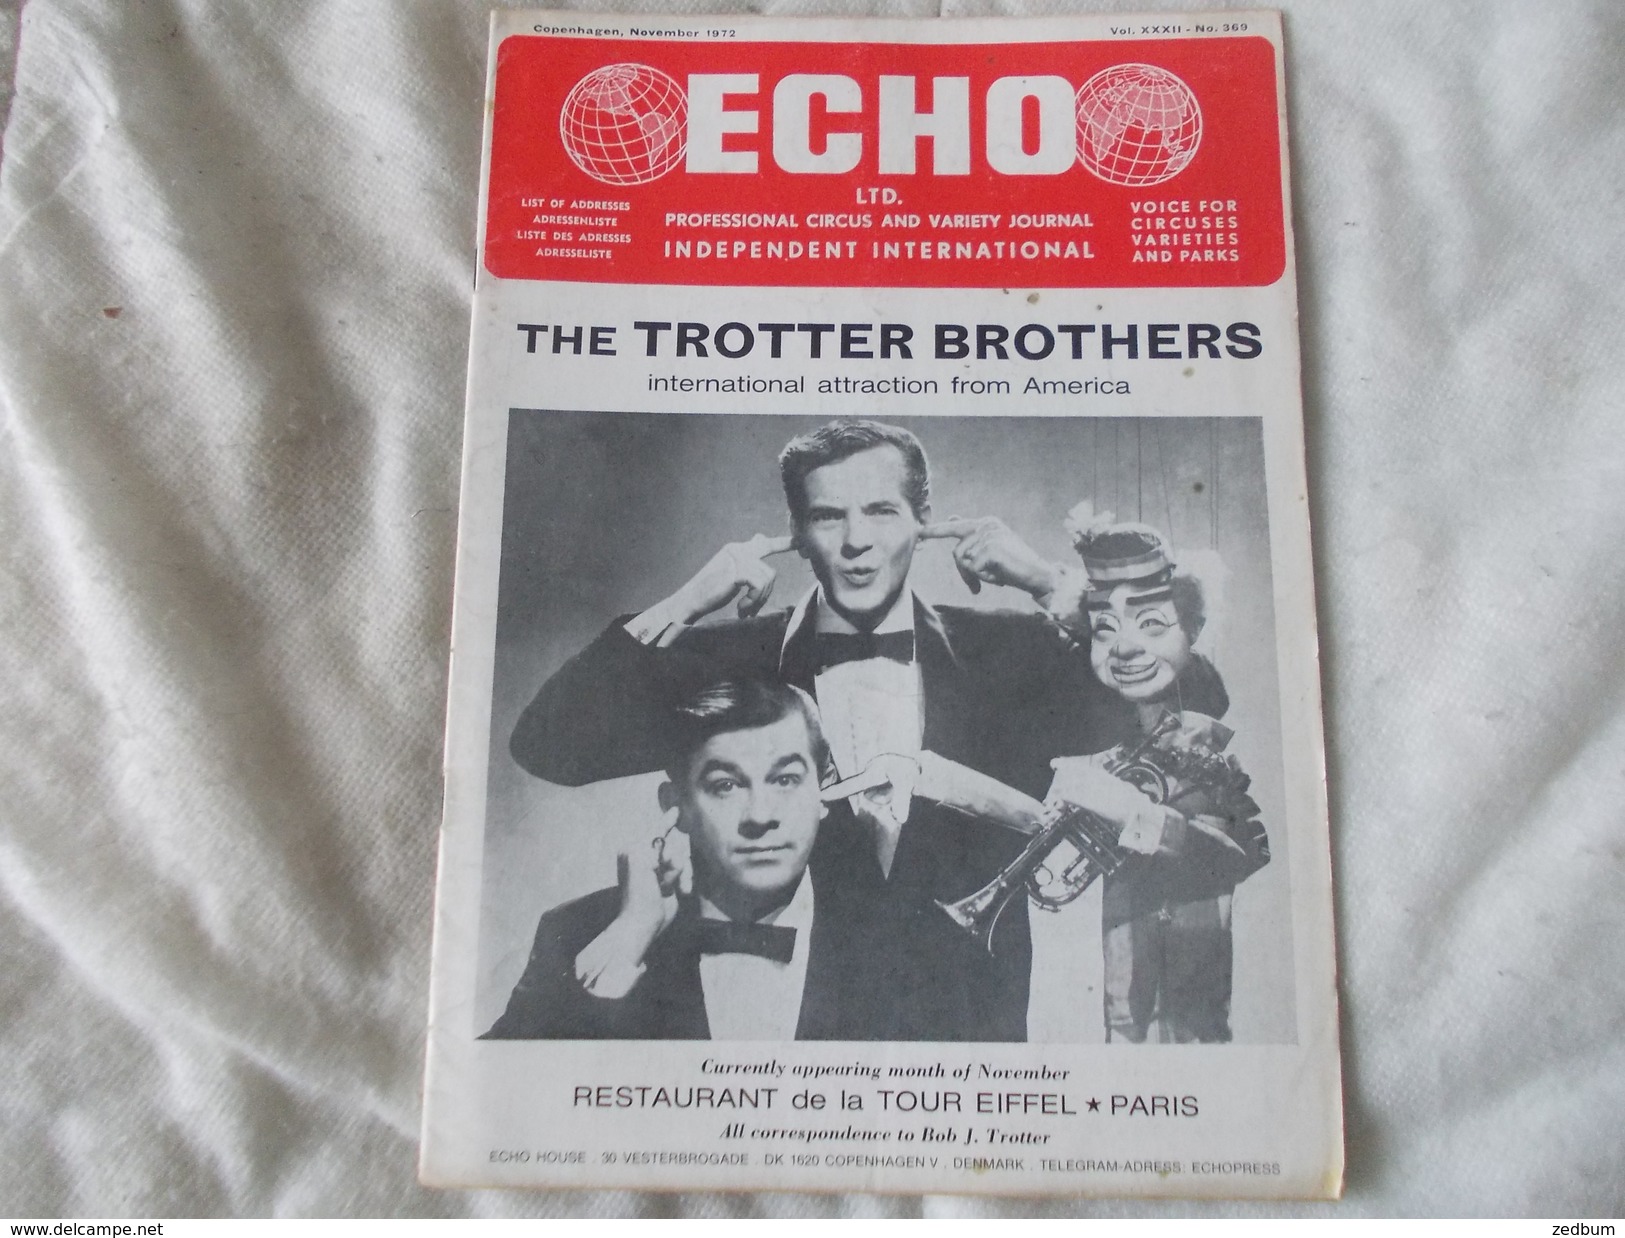 ECHO LTD Professional Circus And Variety Journal Independent International N° 369 November 1972 - Entertainment